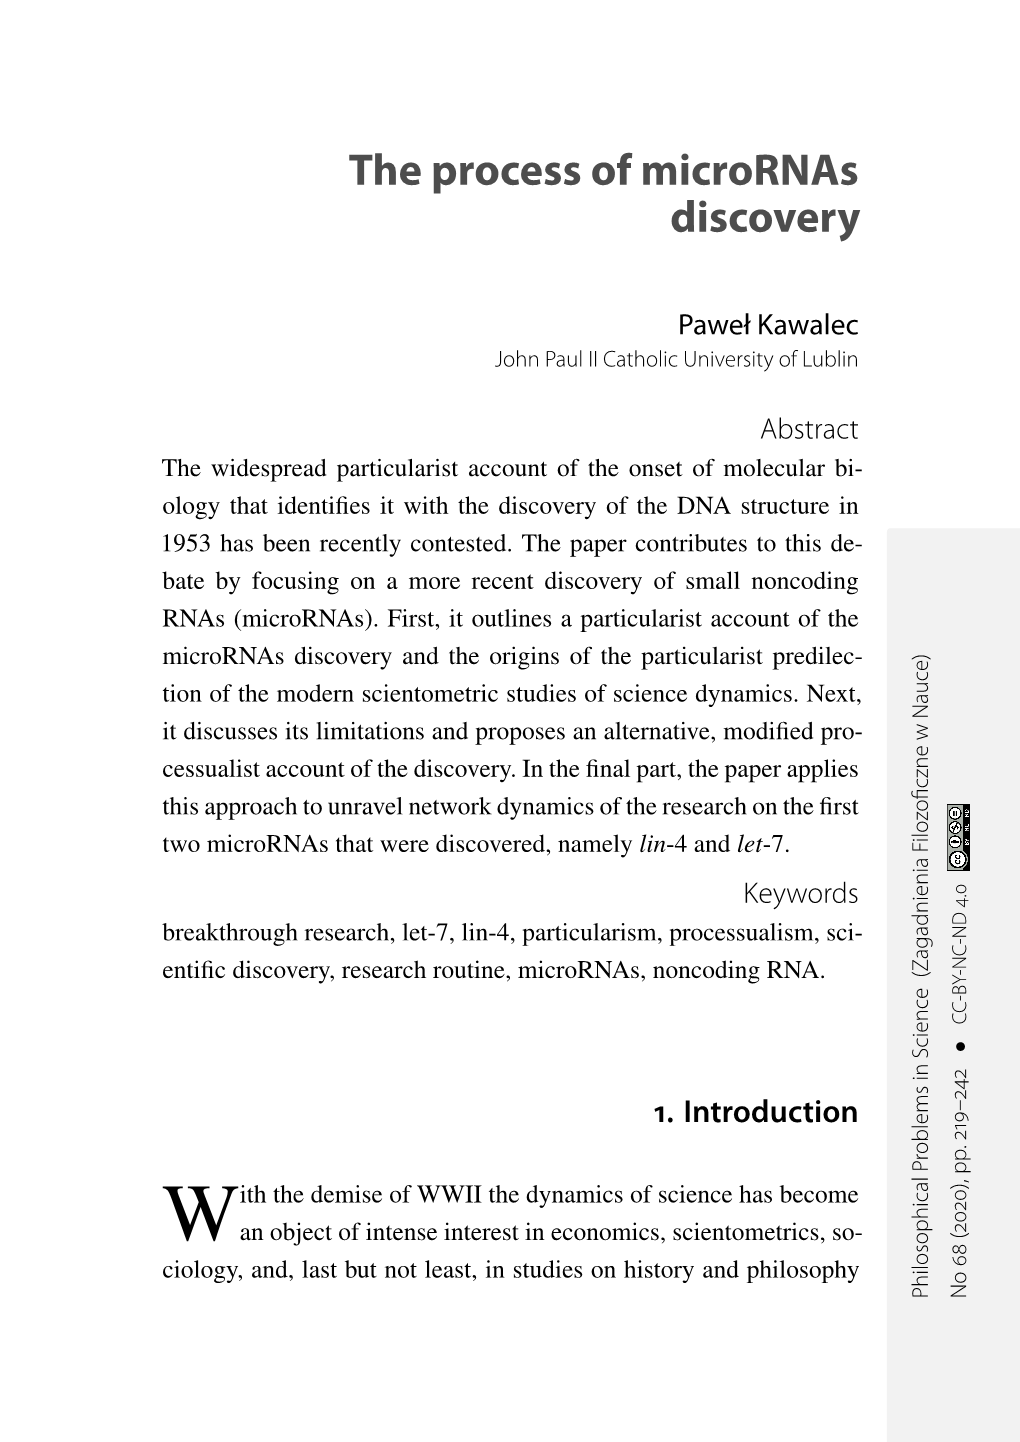 The Process of Micrornas Discovery